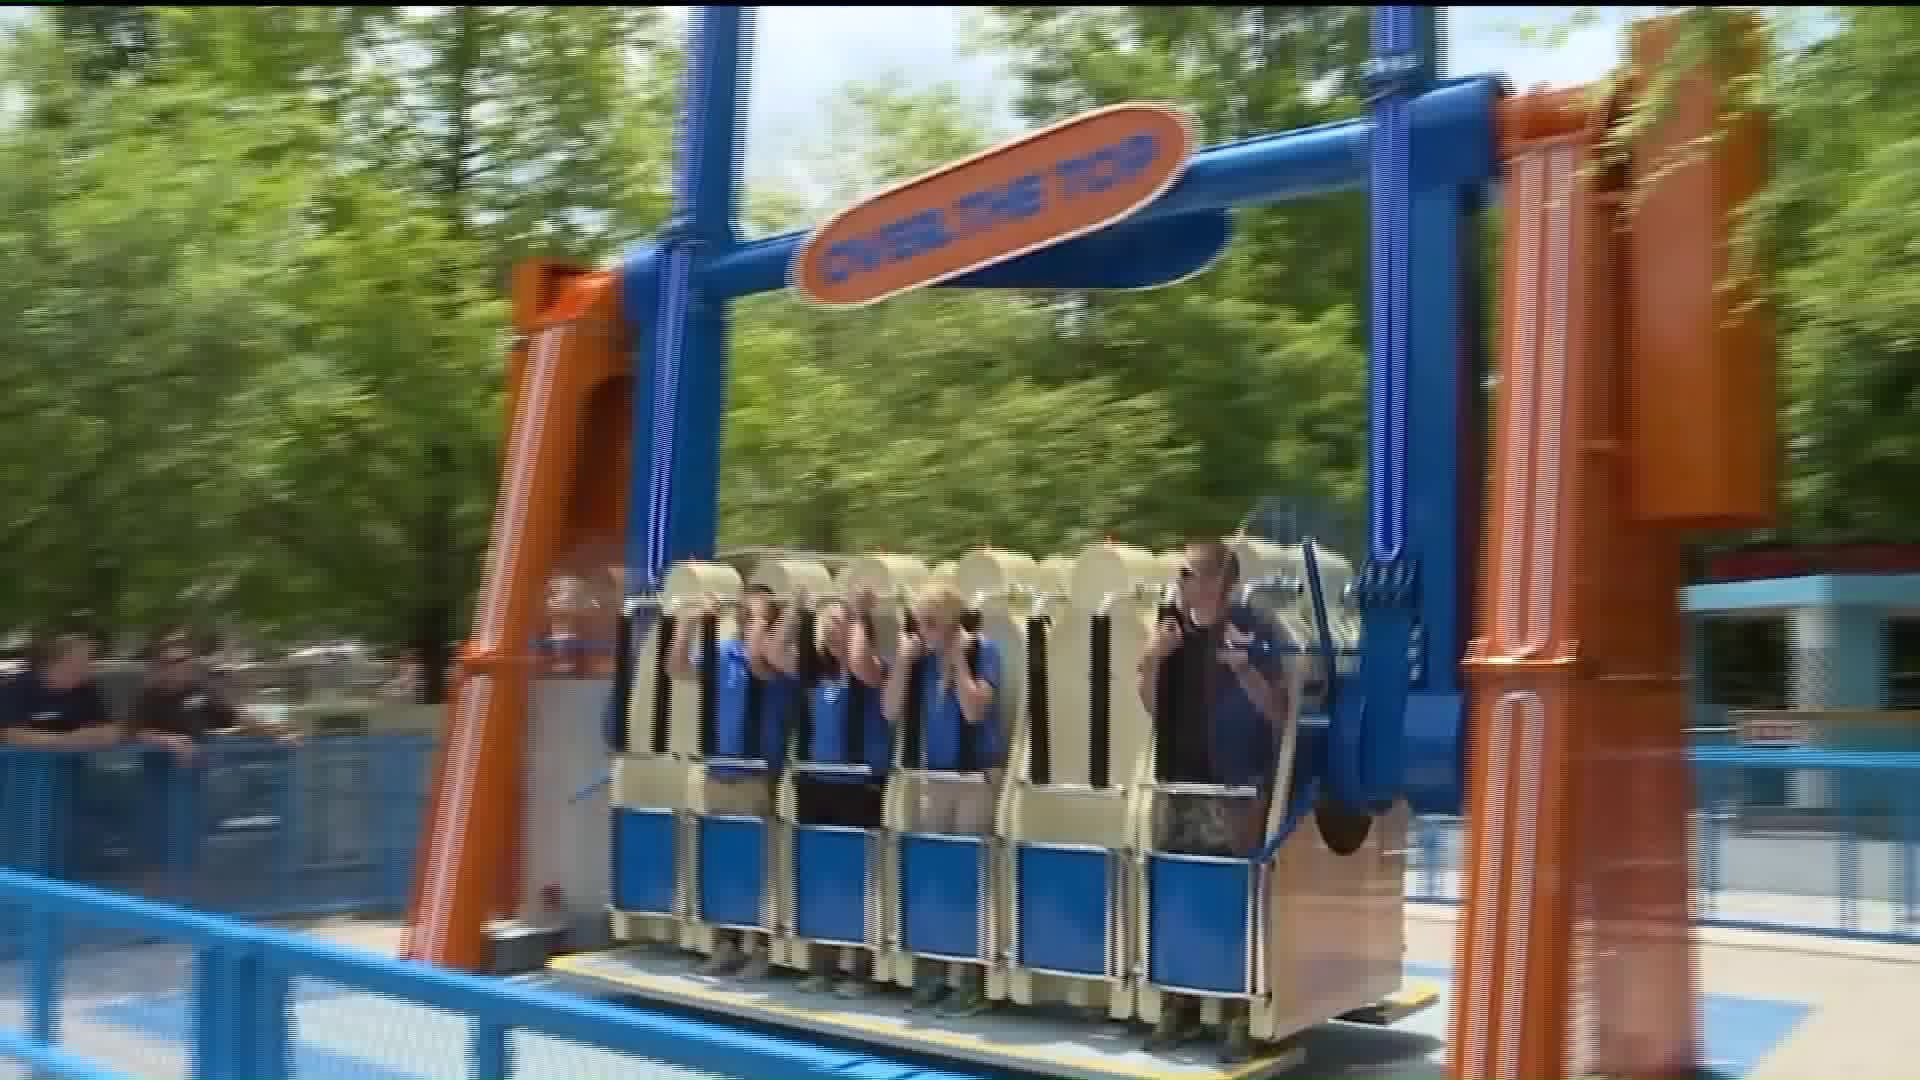 Knoebels Prepares to Welcome New Ride to the Park